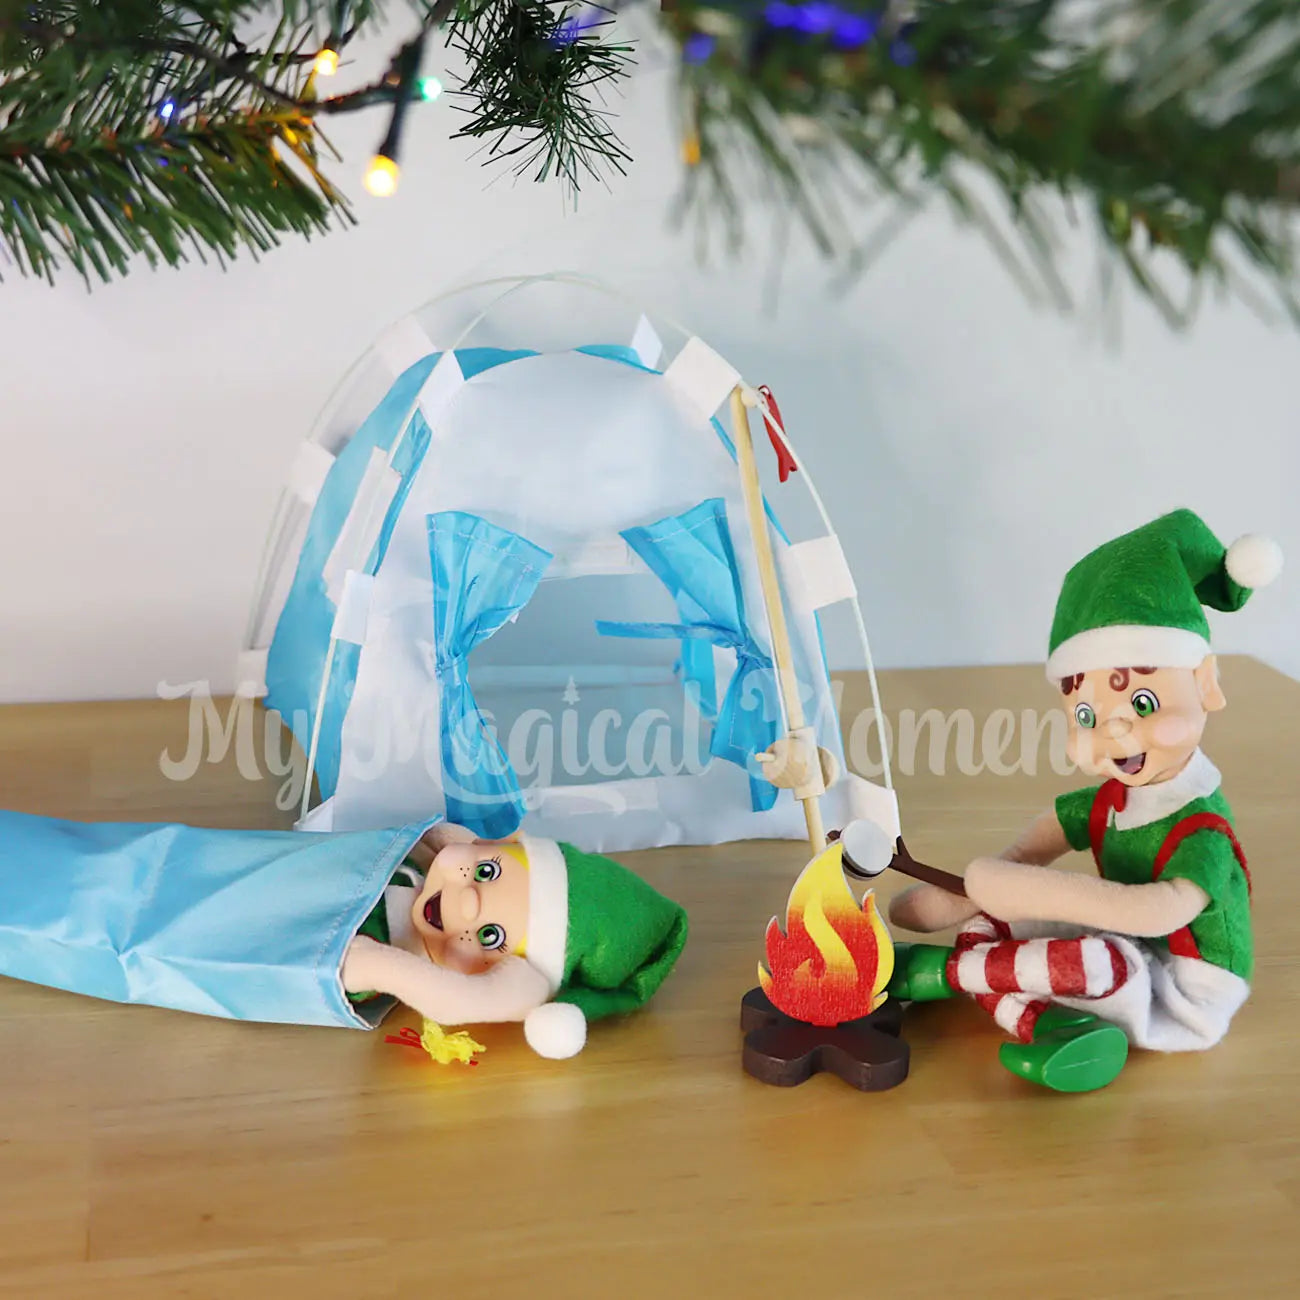 Elves camping under the Chistmas tree